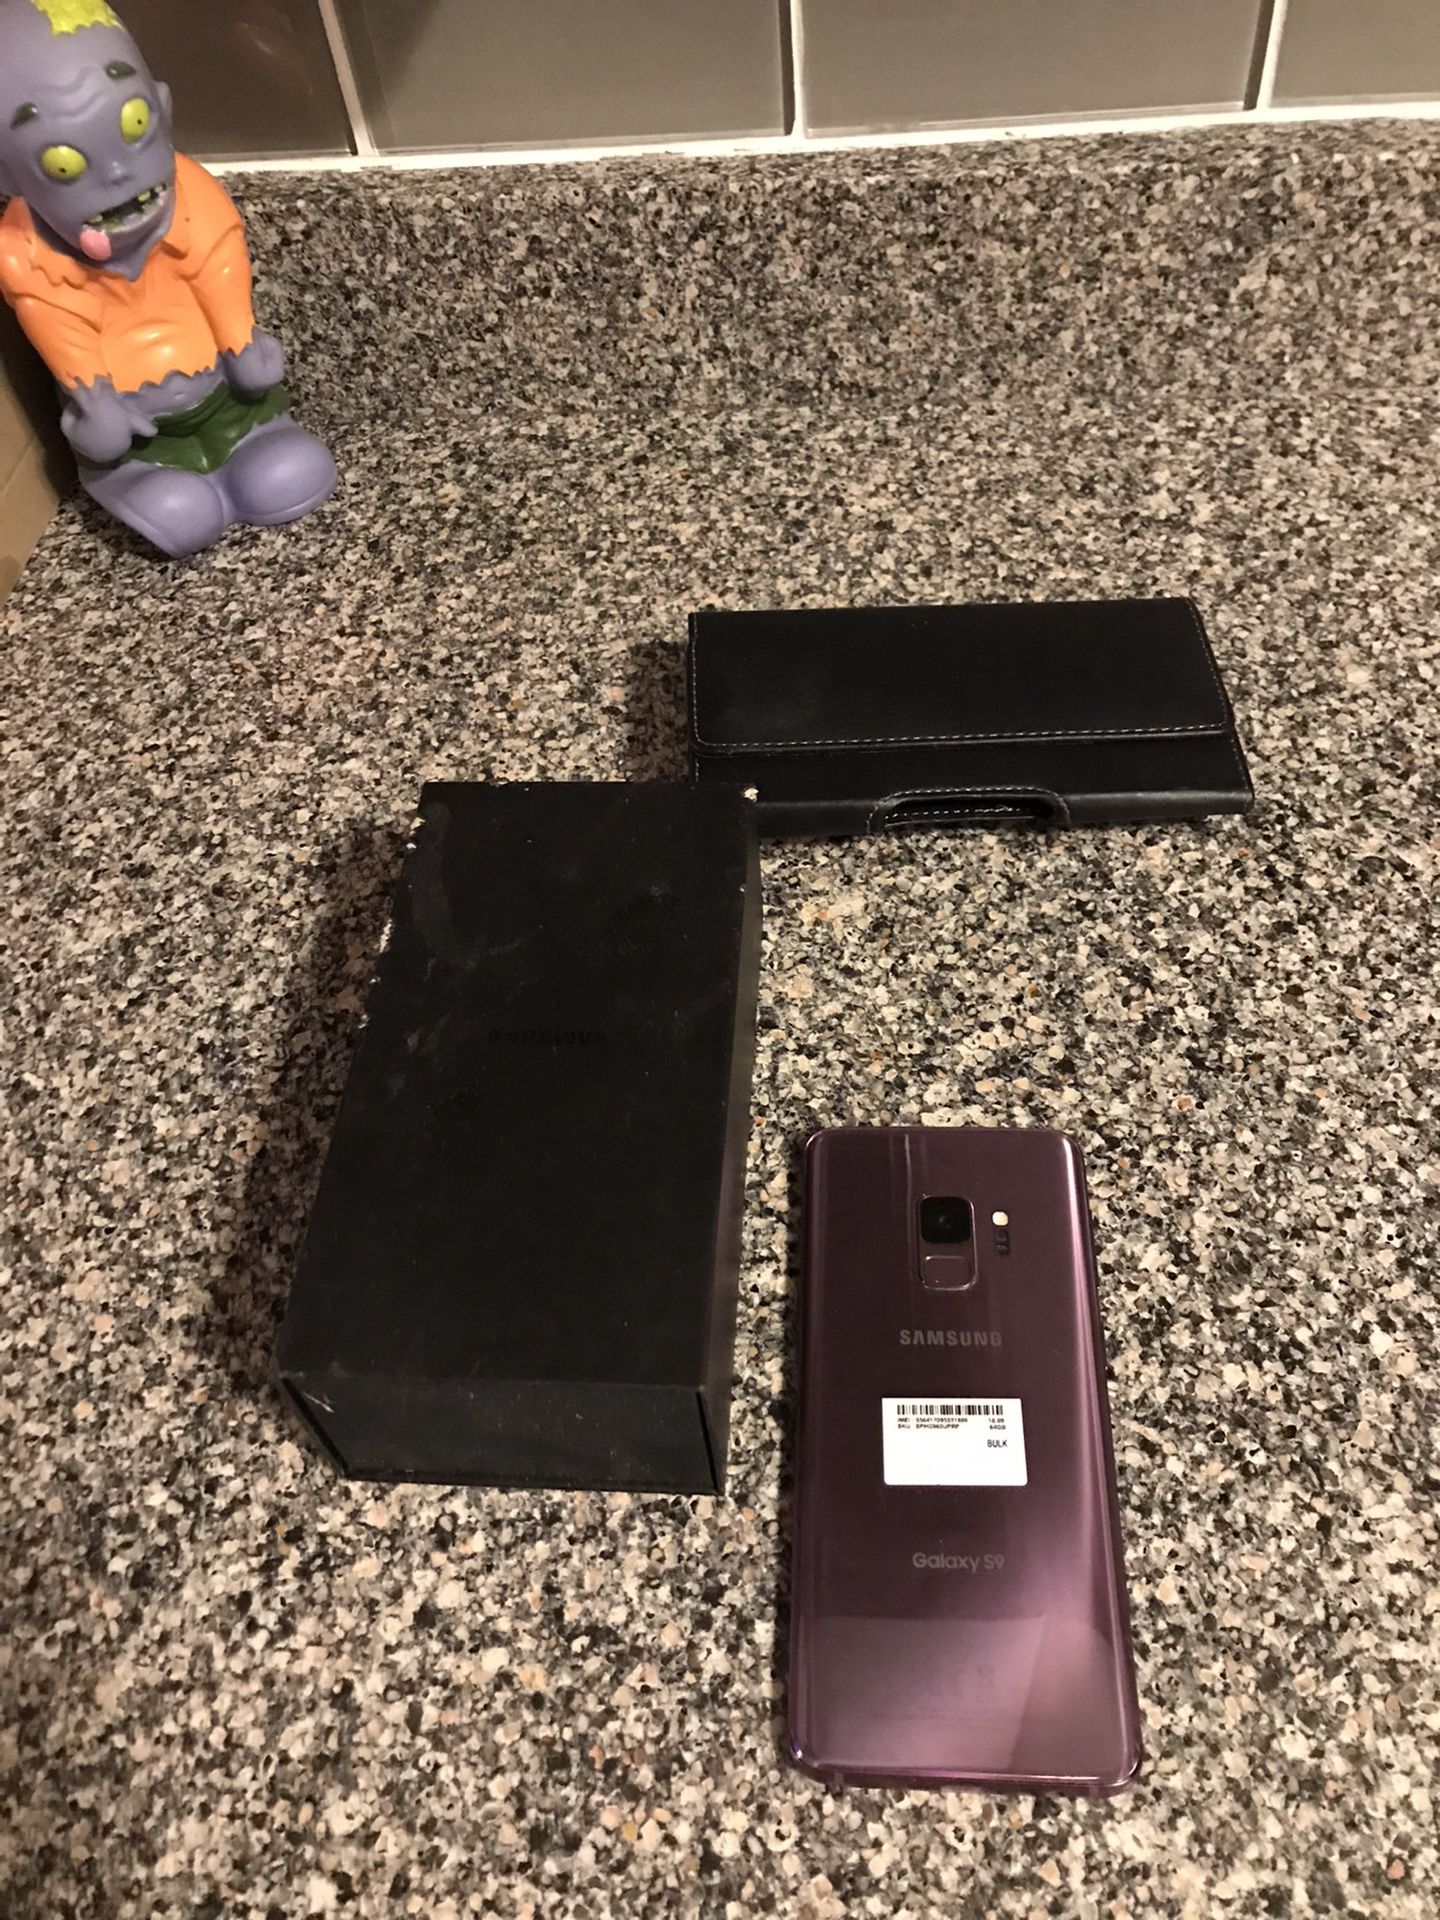 Samsung 9S purple with case and box